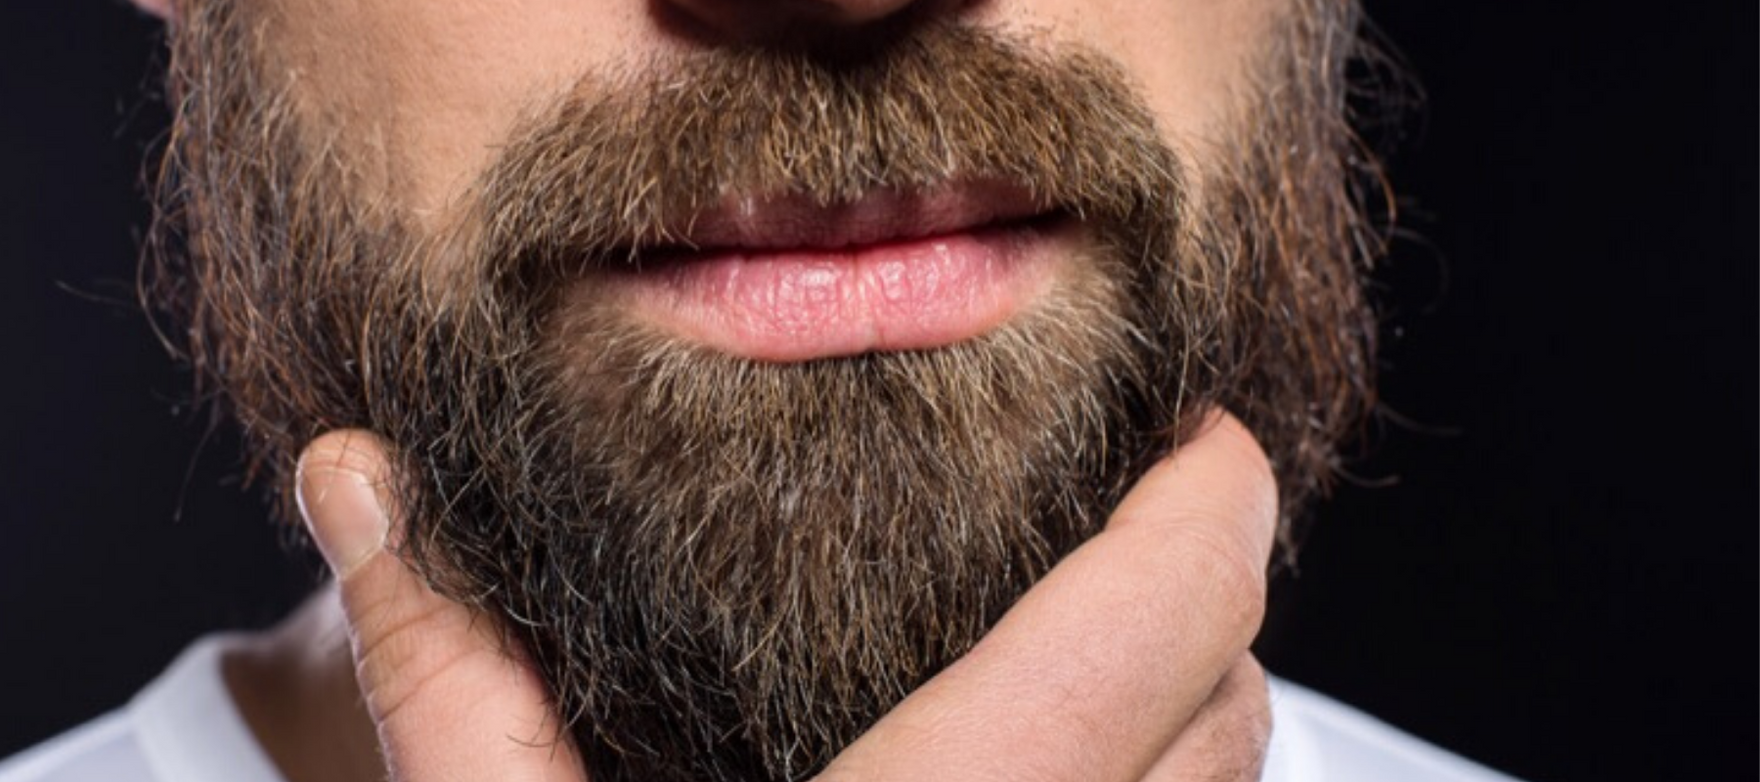 How To Cure And Prevent Split Ends On Your Beard